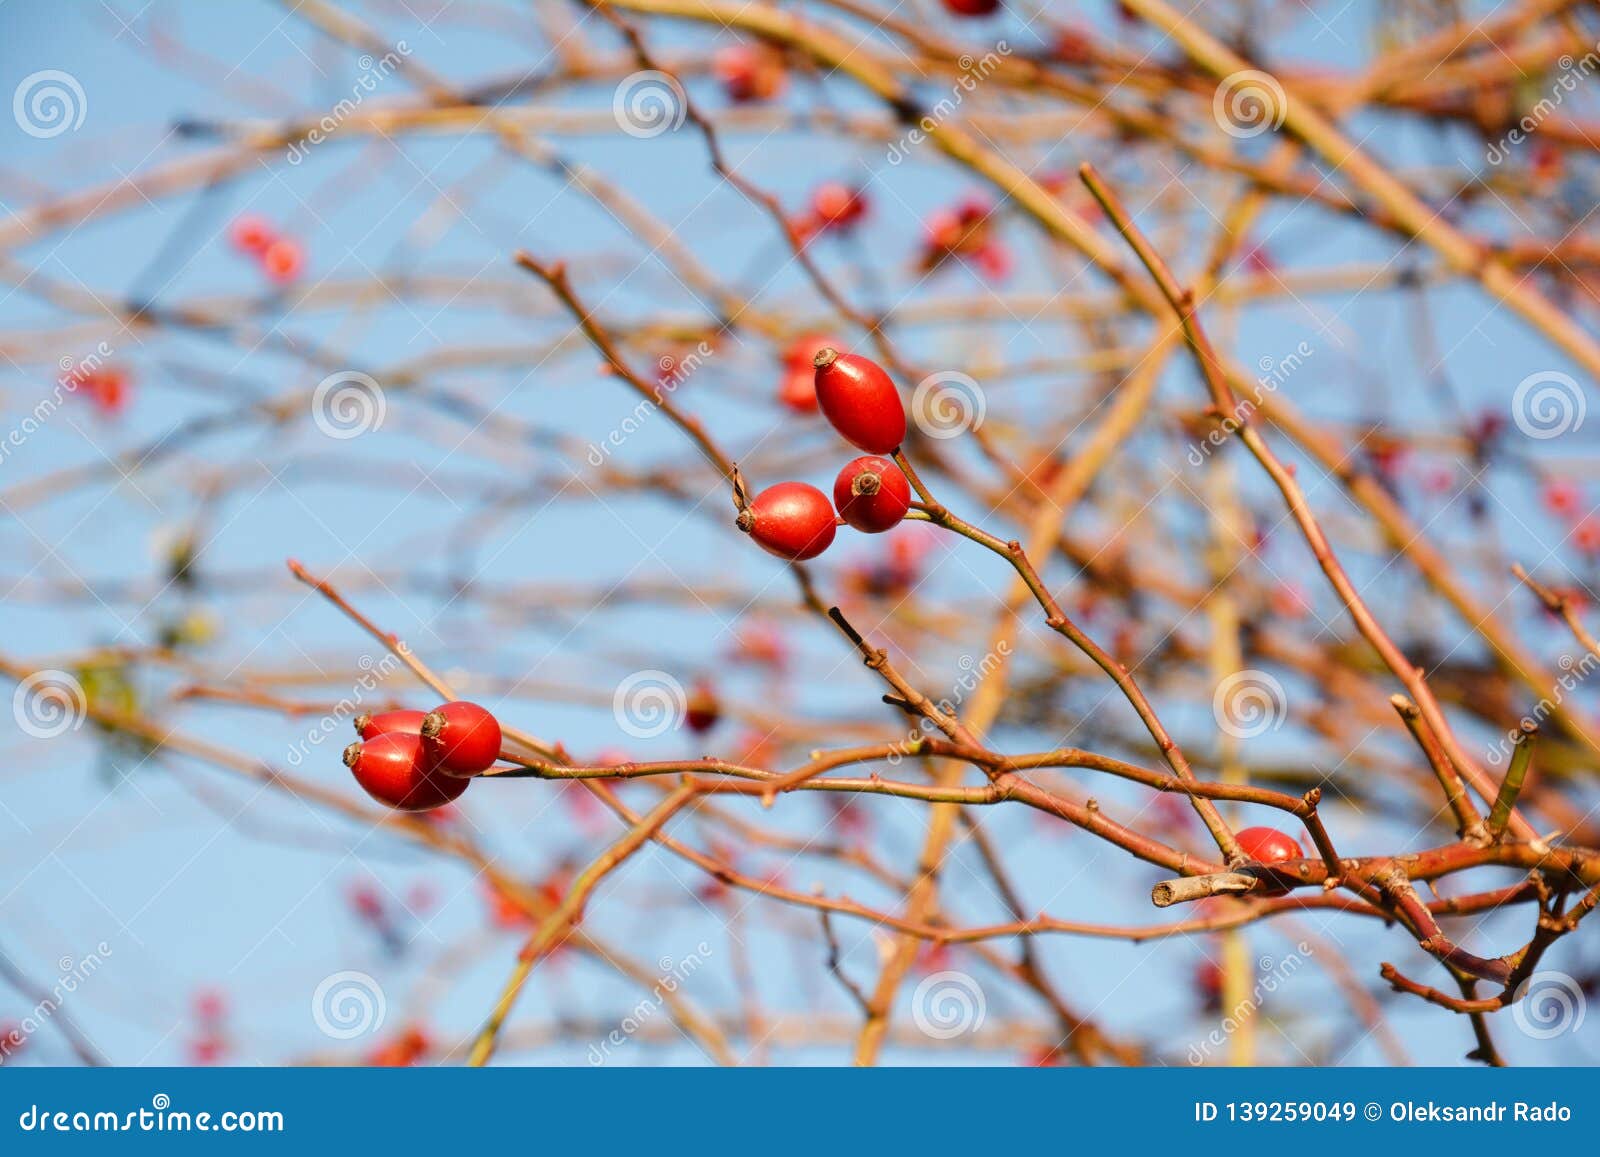 rose hip or rosehip, also called rose haw and rose hep, is the accessory fruit of the rose plant